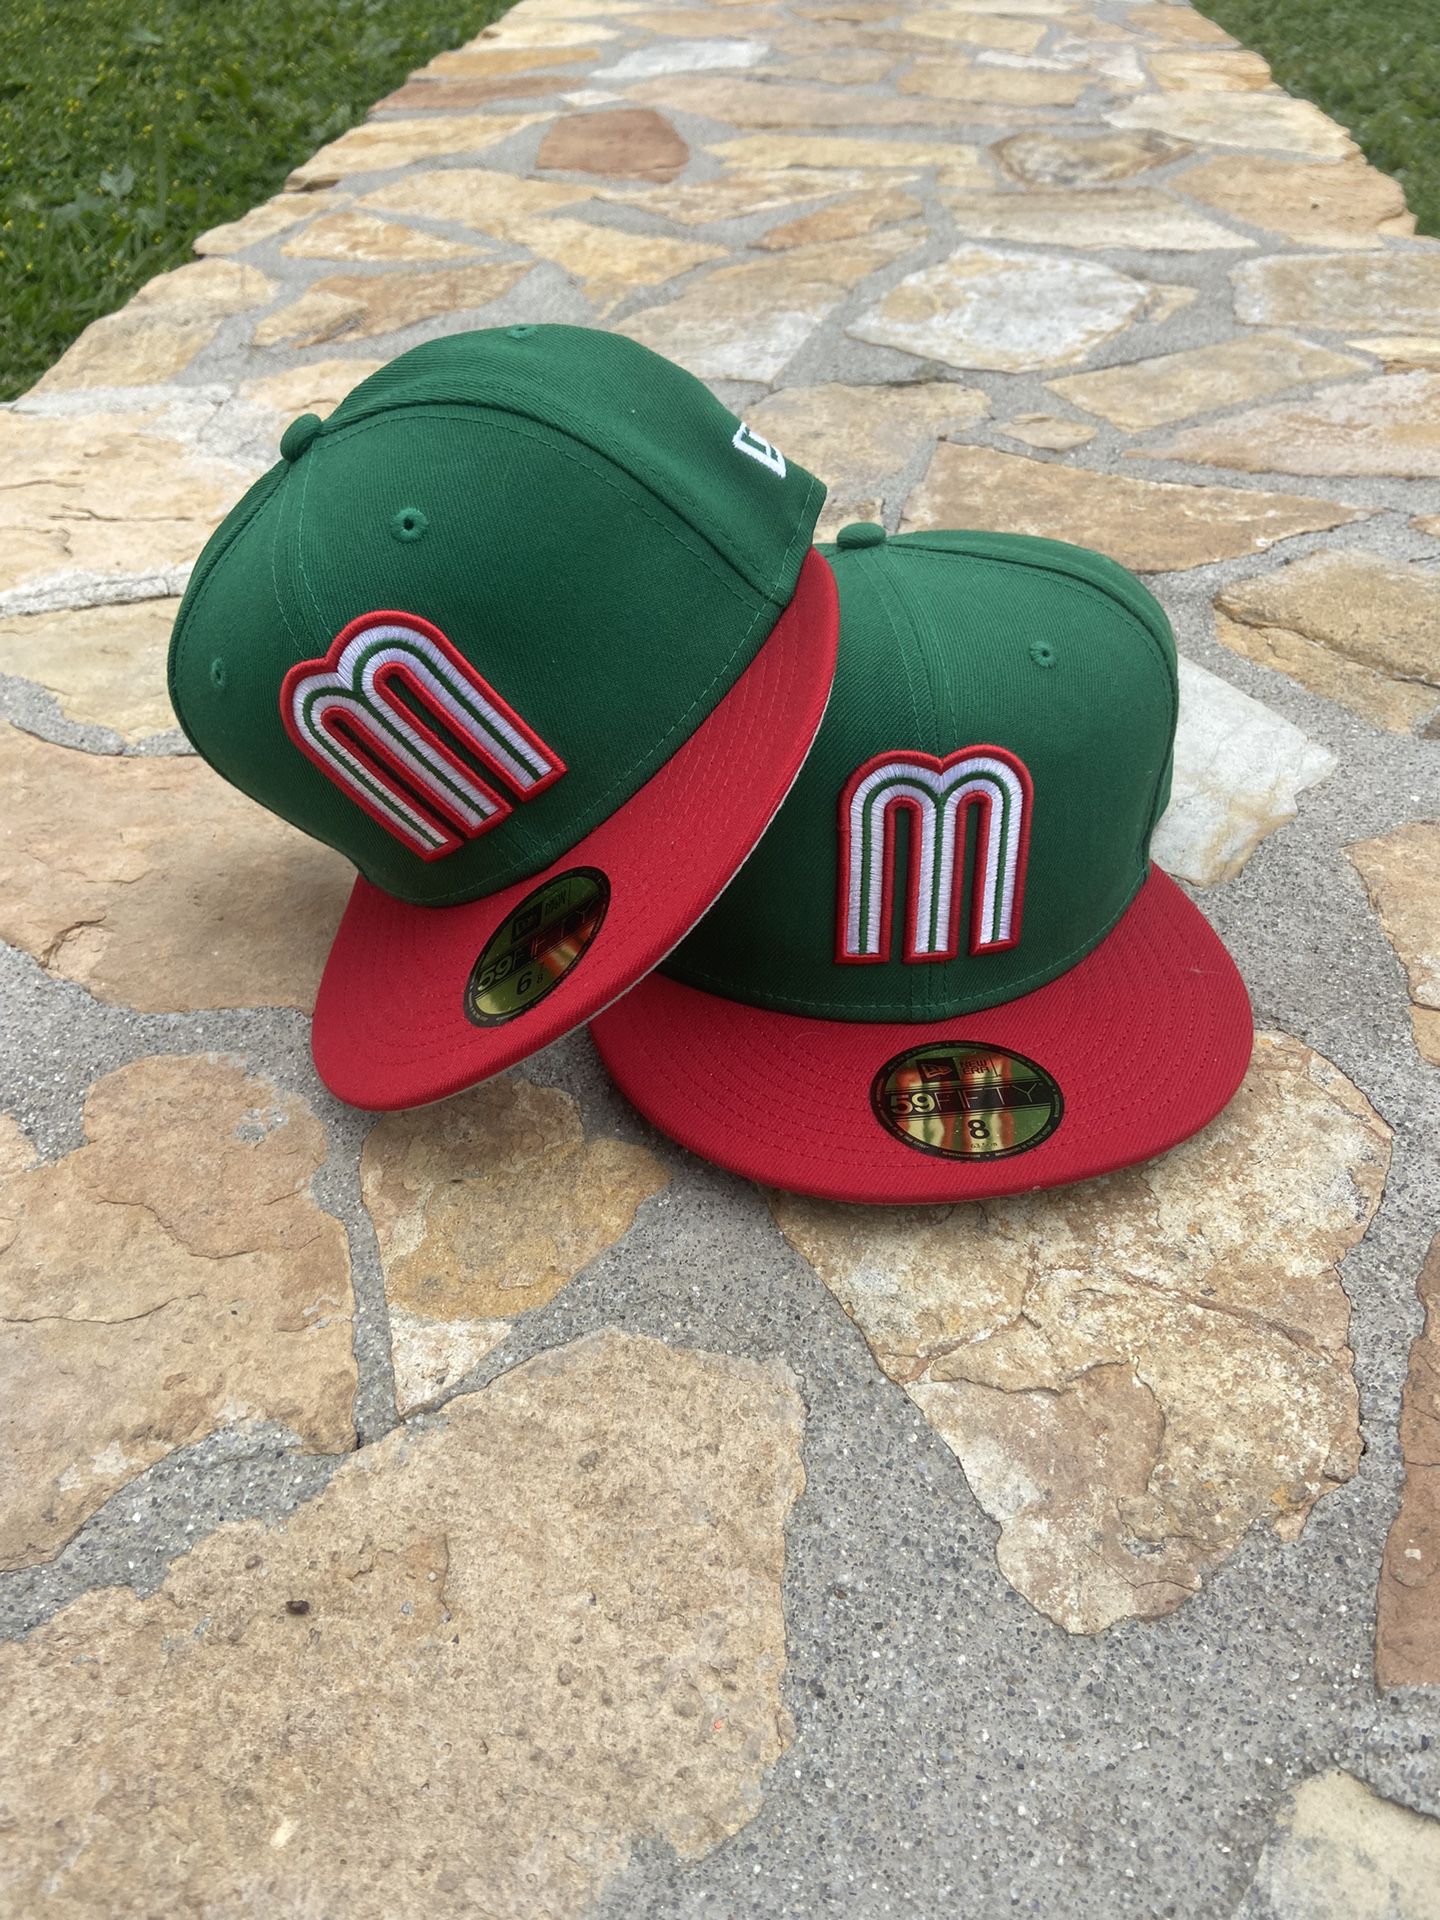 Mexico Fitted Hats (6 7/8, 8)